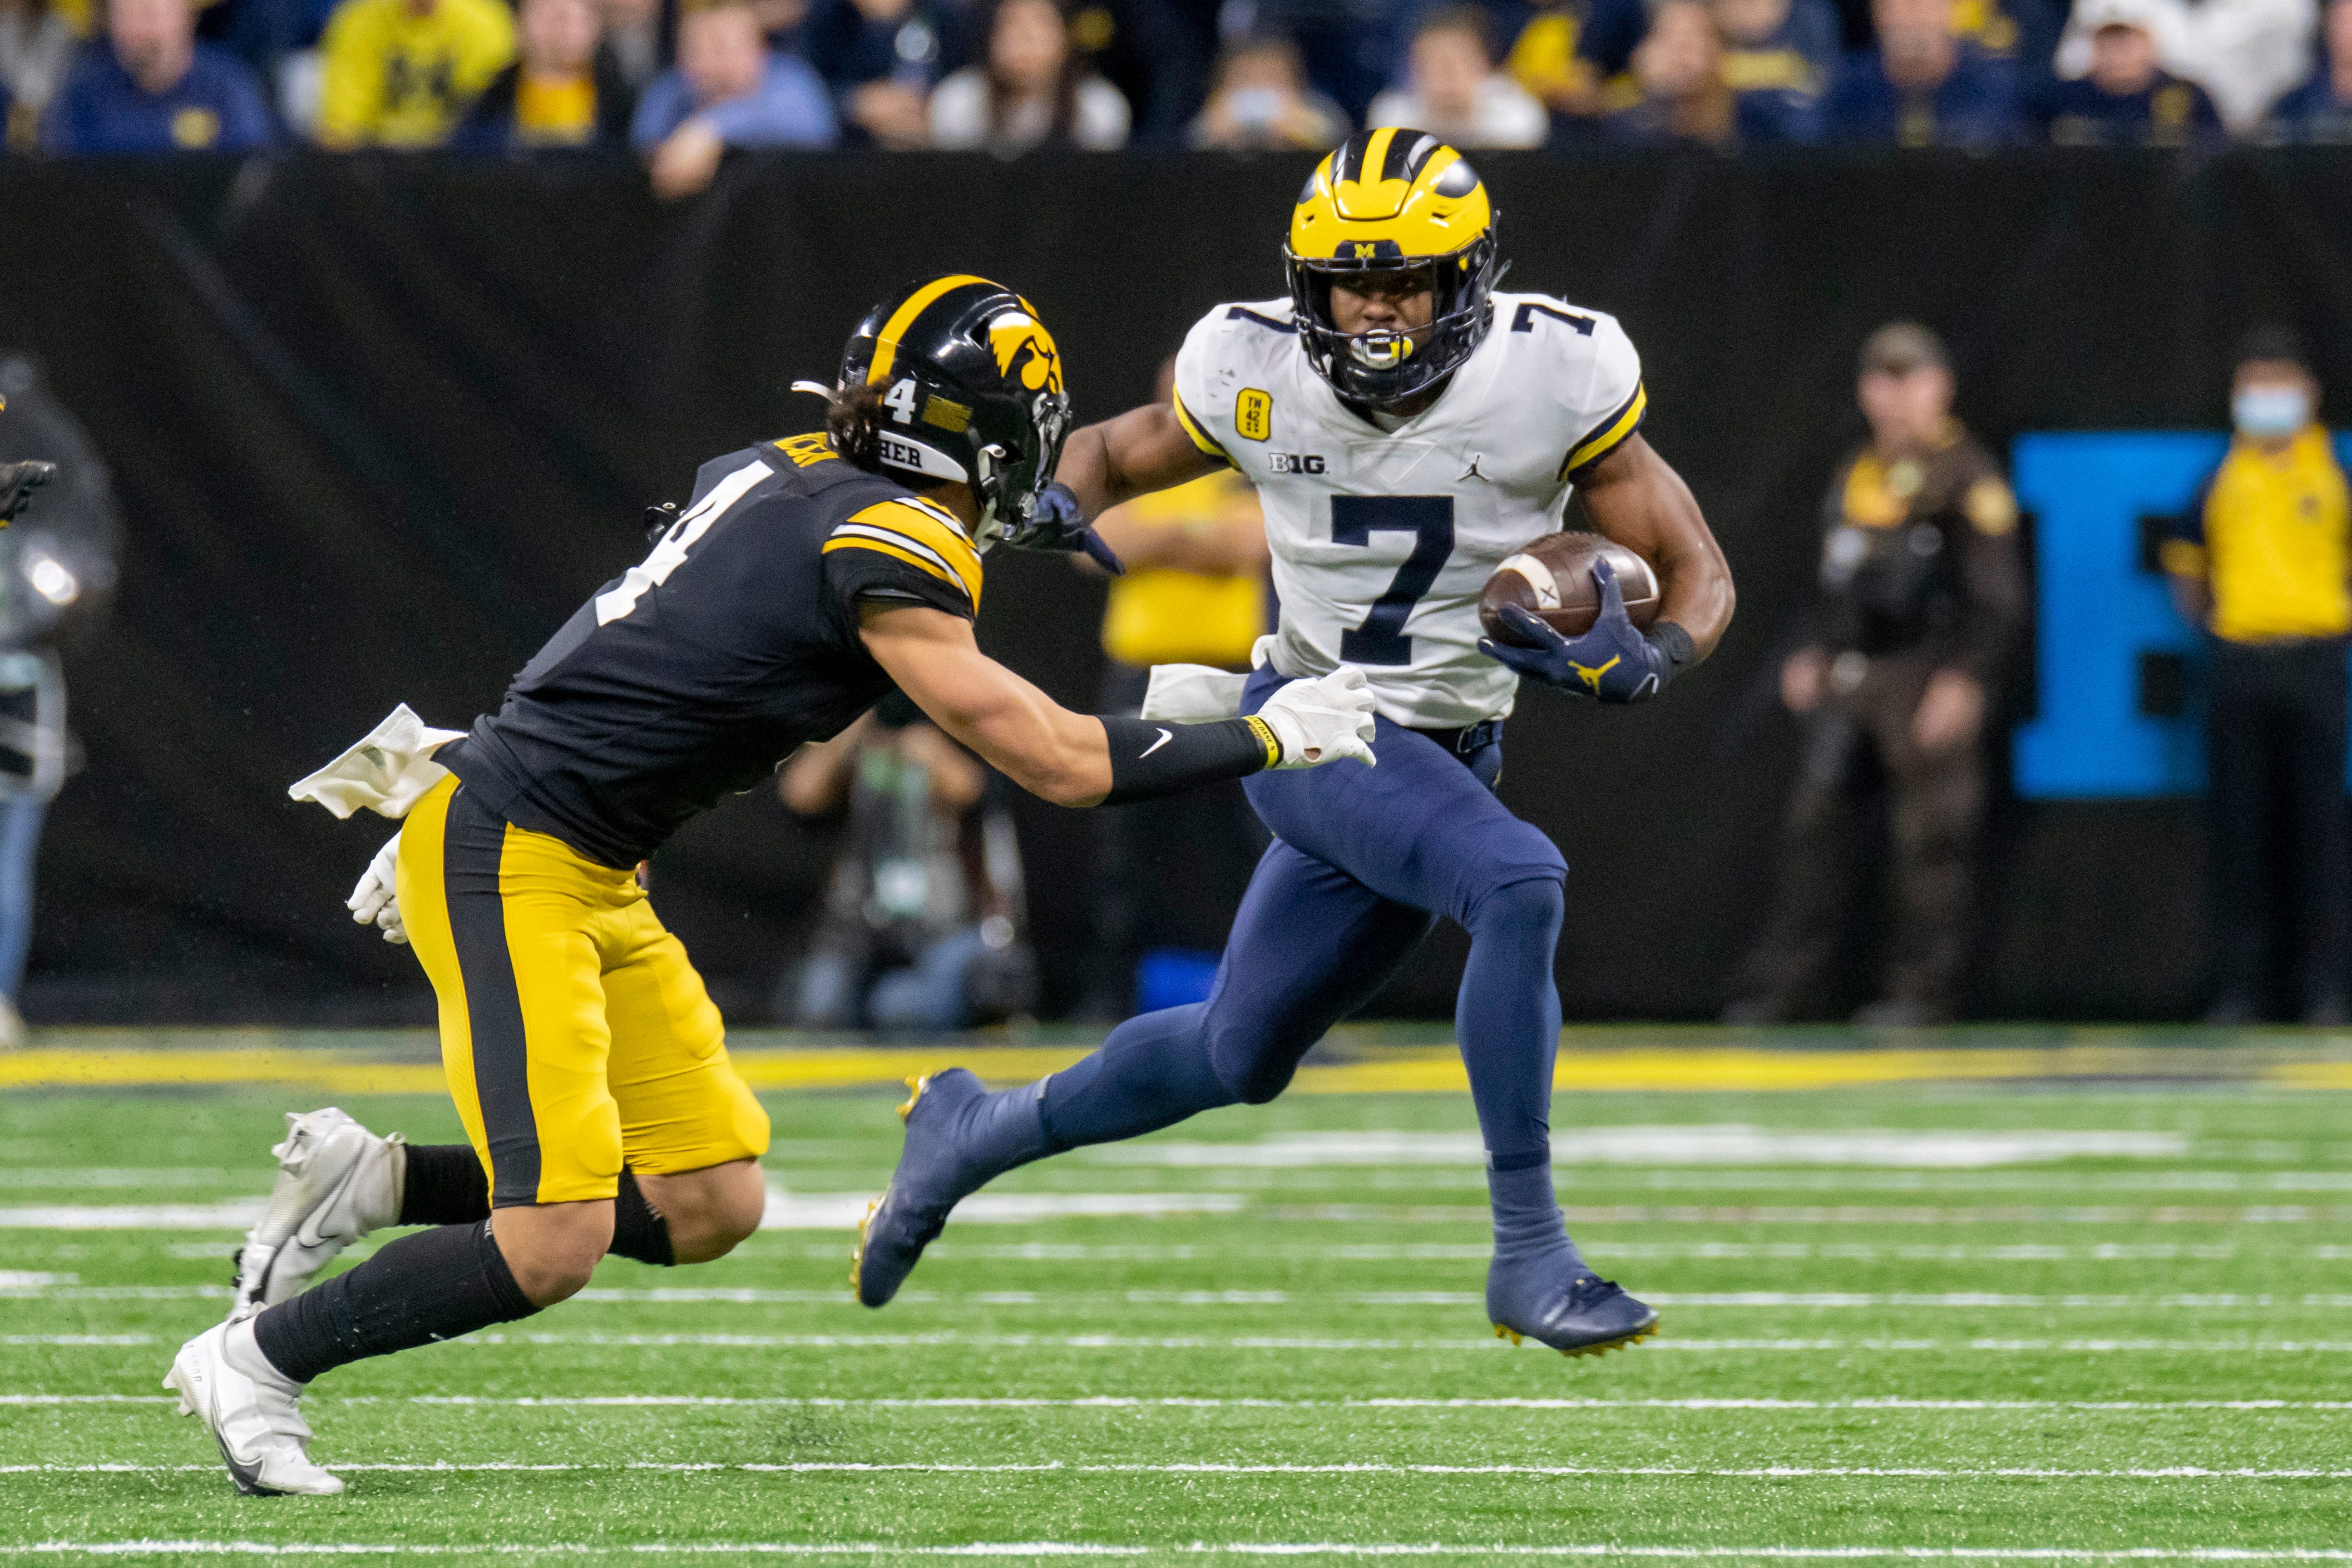 Michigan running back Donovan Edwards runs the ball away from Iowa defensive back Dane Belton during the second quarter.